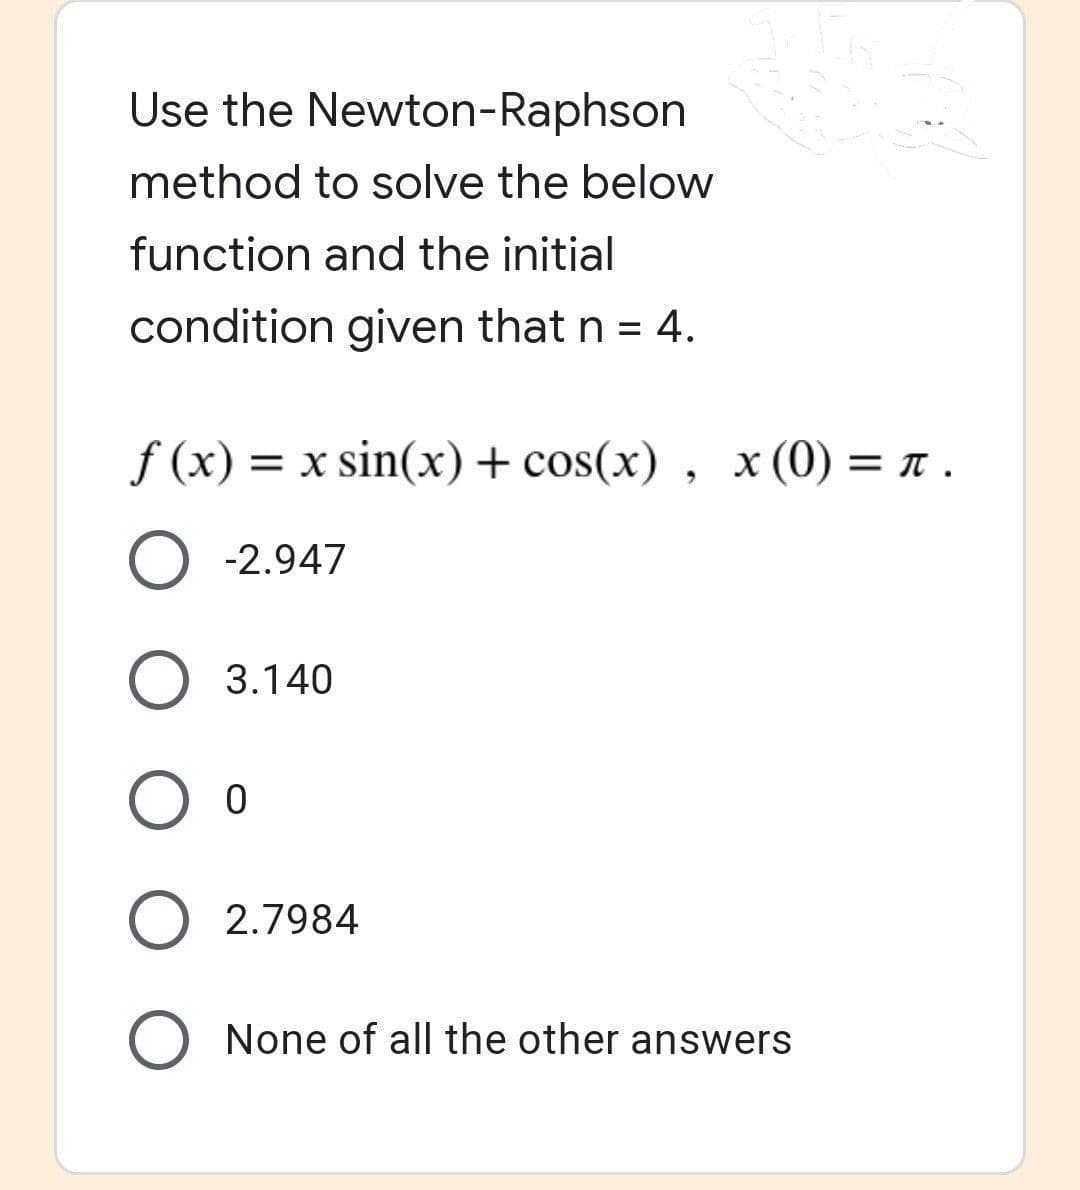 Use the Newton-Raphson
method to solve the below
function and the initial
condition given that n = 4.
f(x) = x sin(x) + cos(x), x (0) = π .
O -2.947
O 3.140
O O
O 2.7984
O None of all the other answers